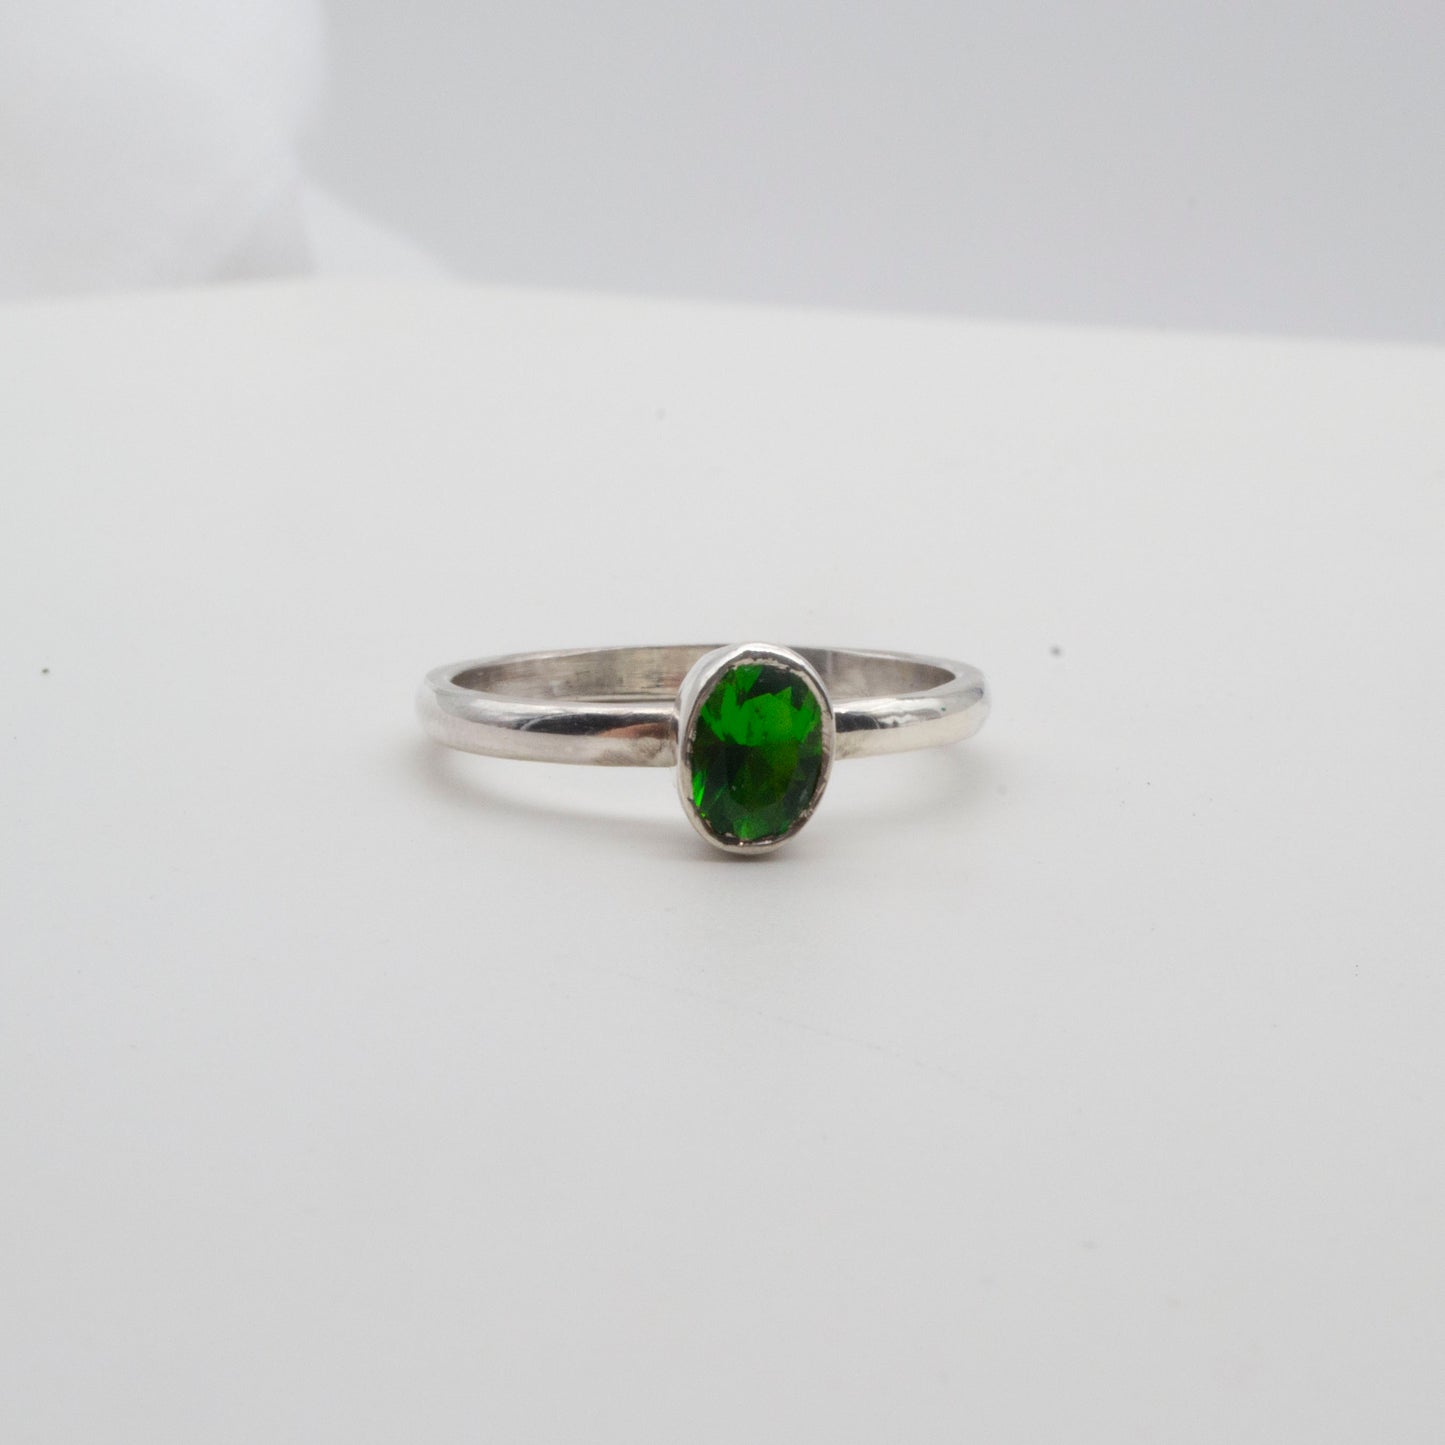 Size s1/2 or T - synth emerald oval ring